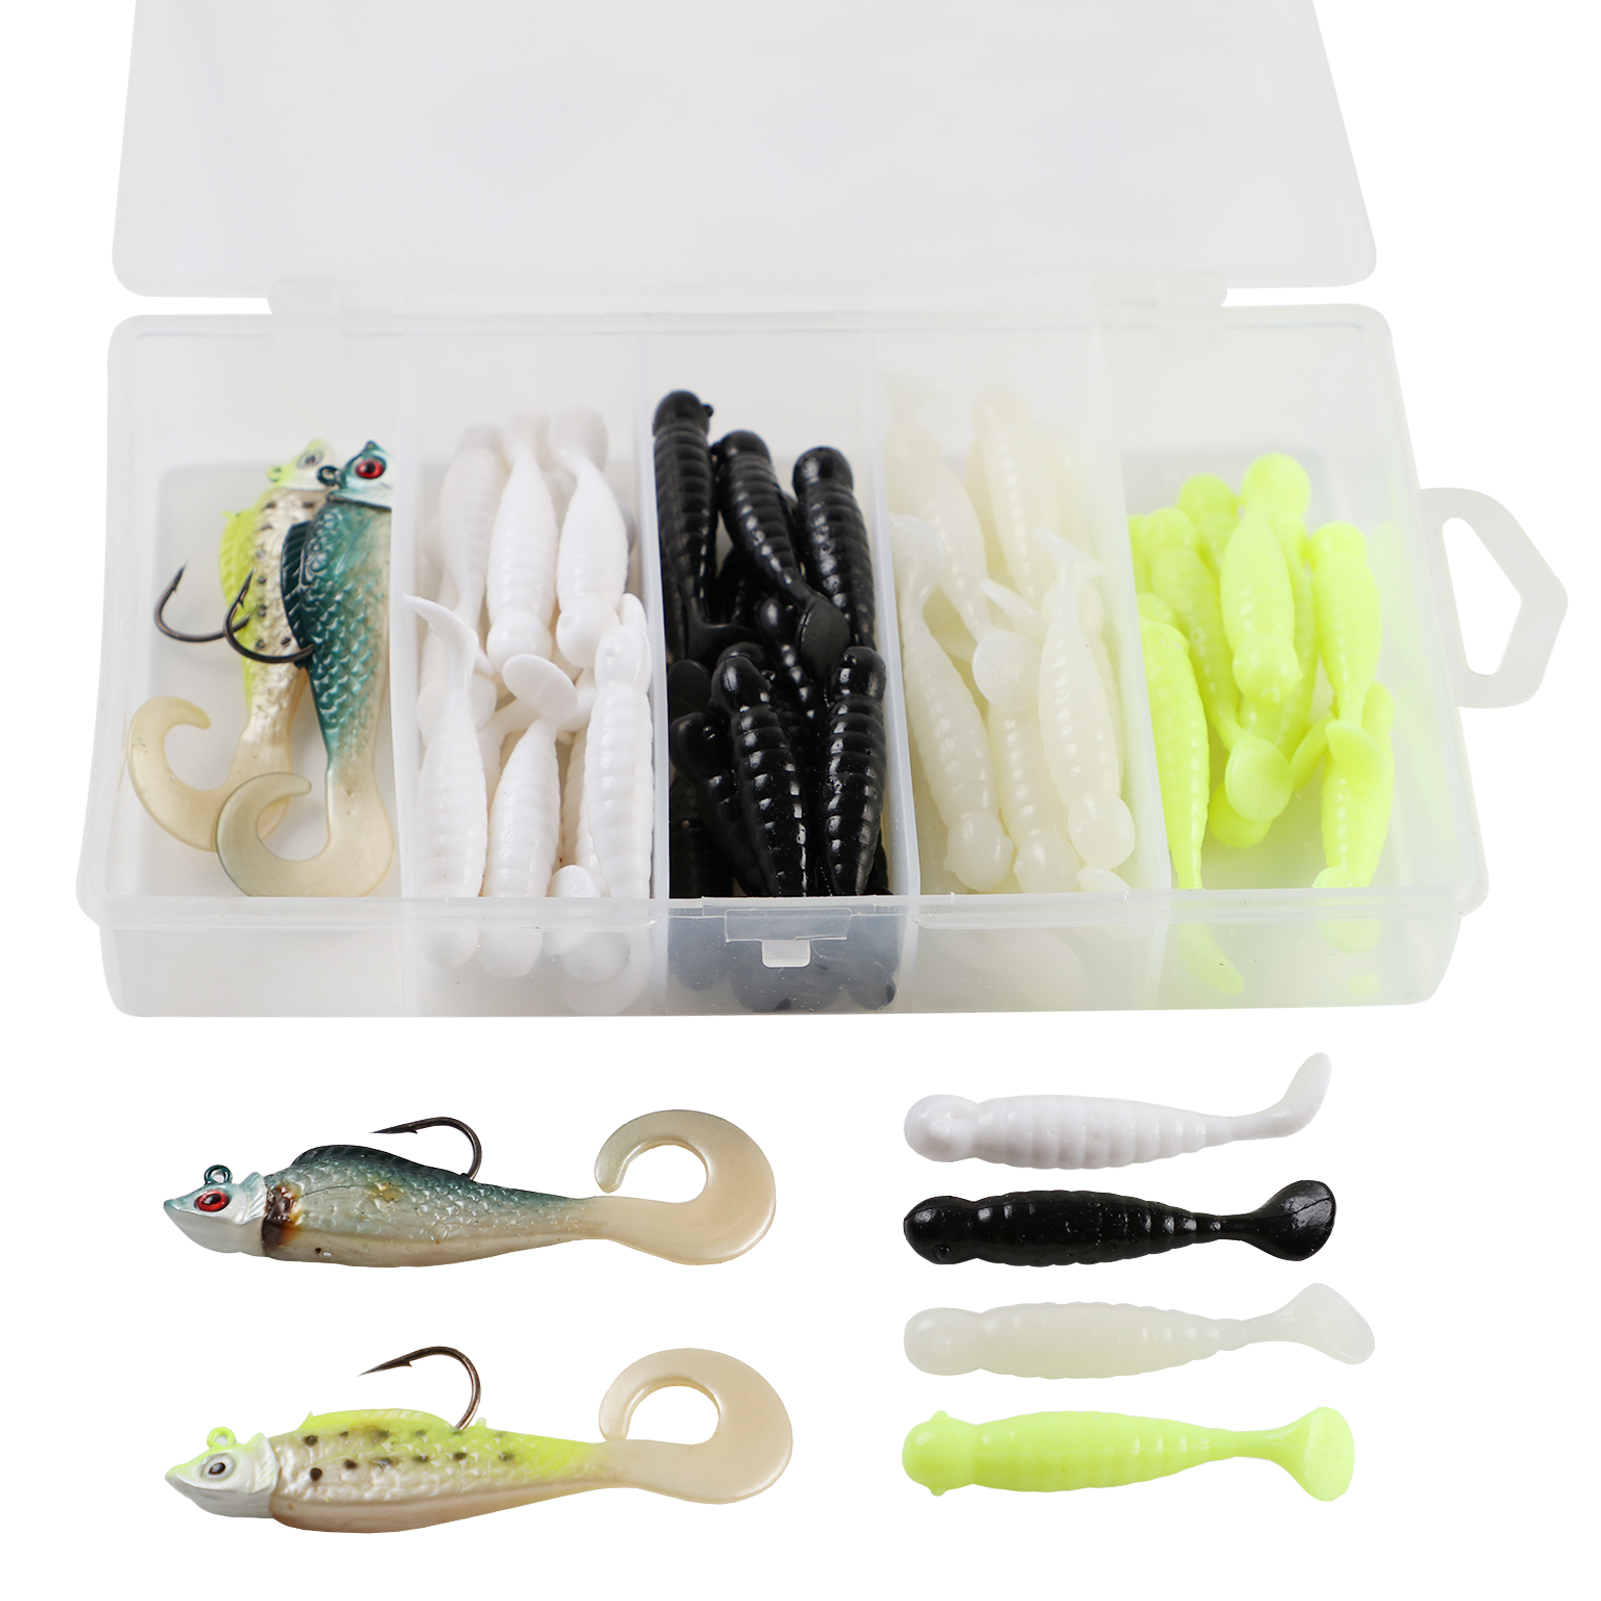 FREE FISHER Fishing Soft Lures Set 60pcs Baits with Plastic 5-Grid Clear Box Wobbler Swimbait Artificial T-tail Bionic Baits for Carp/Bass Fishing